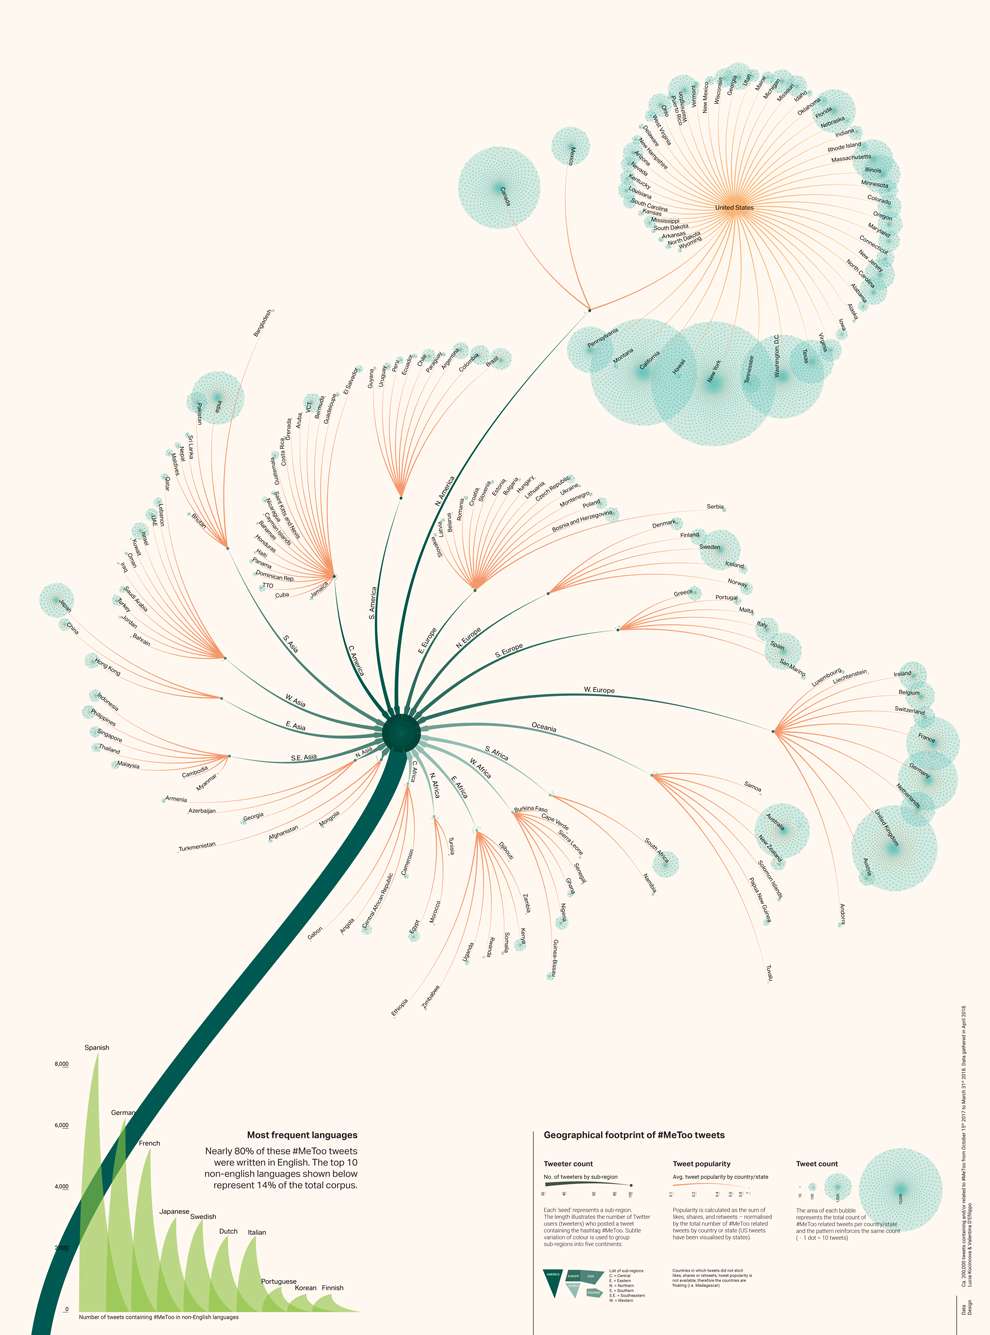 Valentina  D’Efilippo, Infographic data visualisation of a dandelion representing the Metoo movement hashtag on twitter  